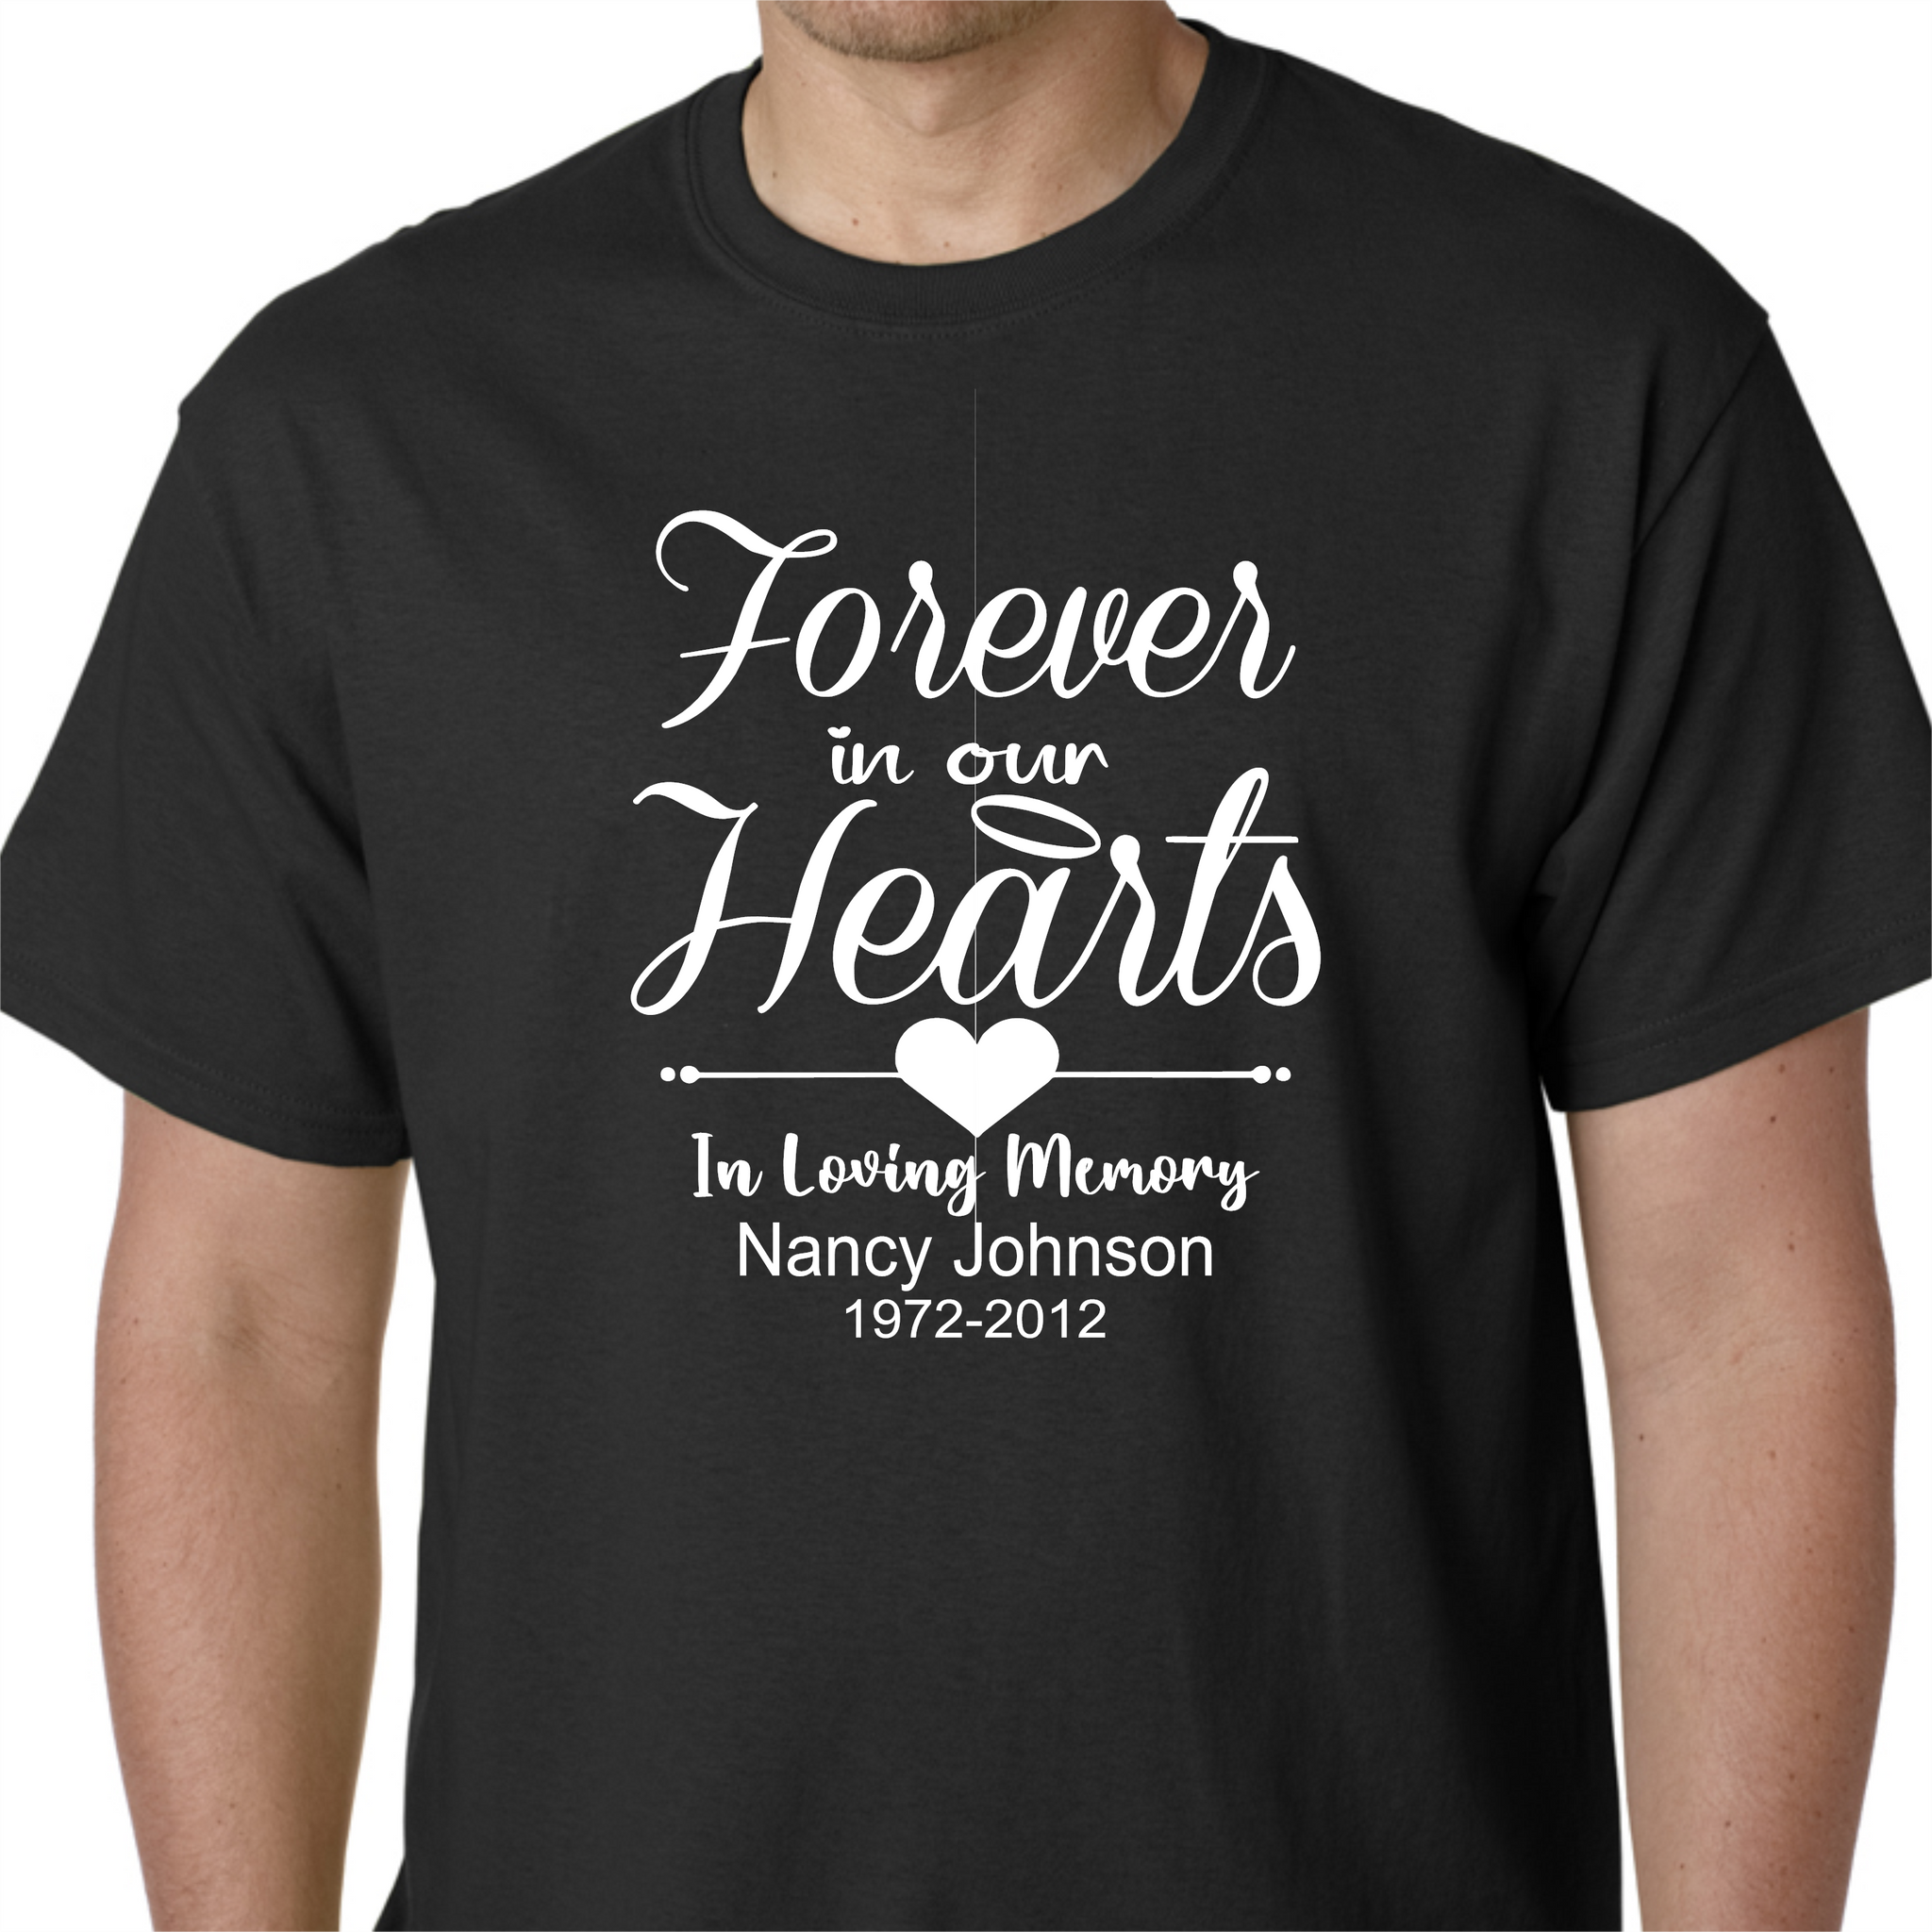 Loving Memory T-Shirts for Sale